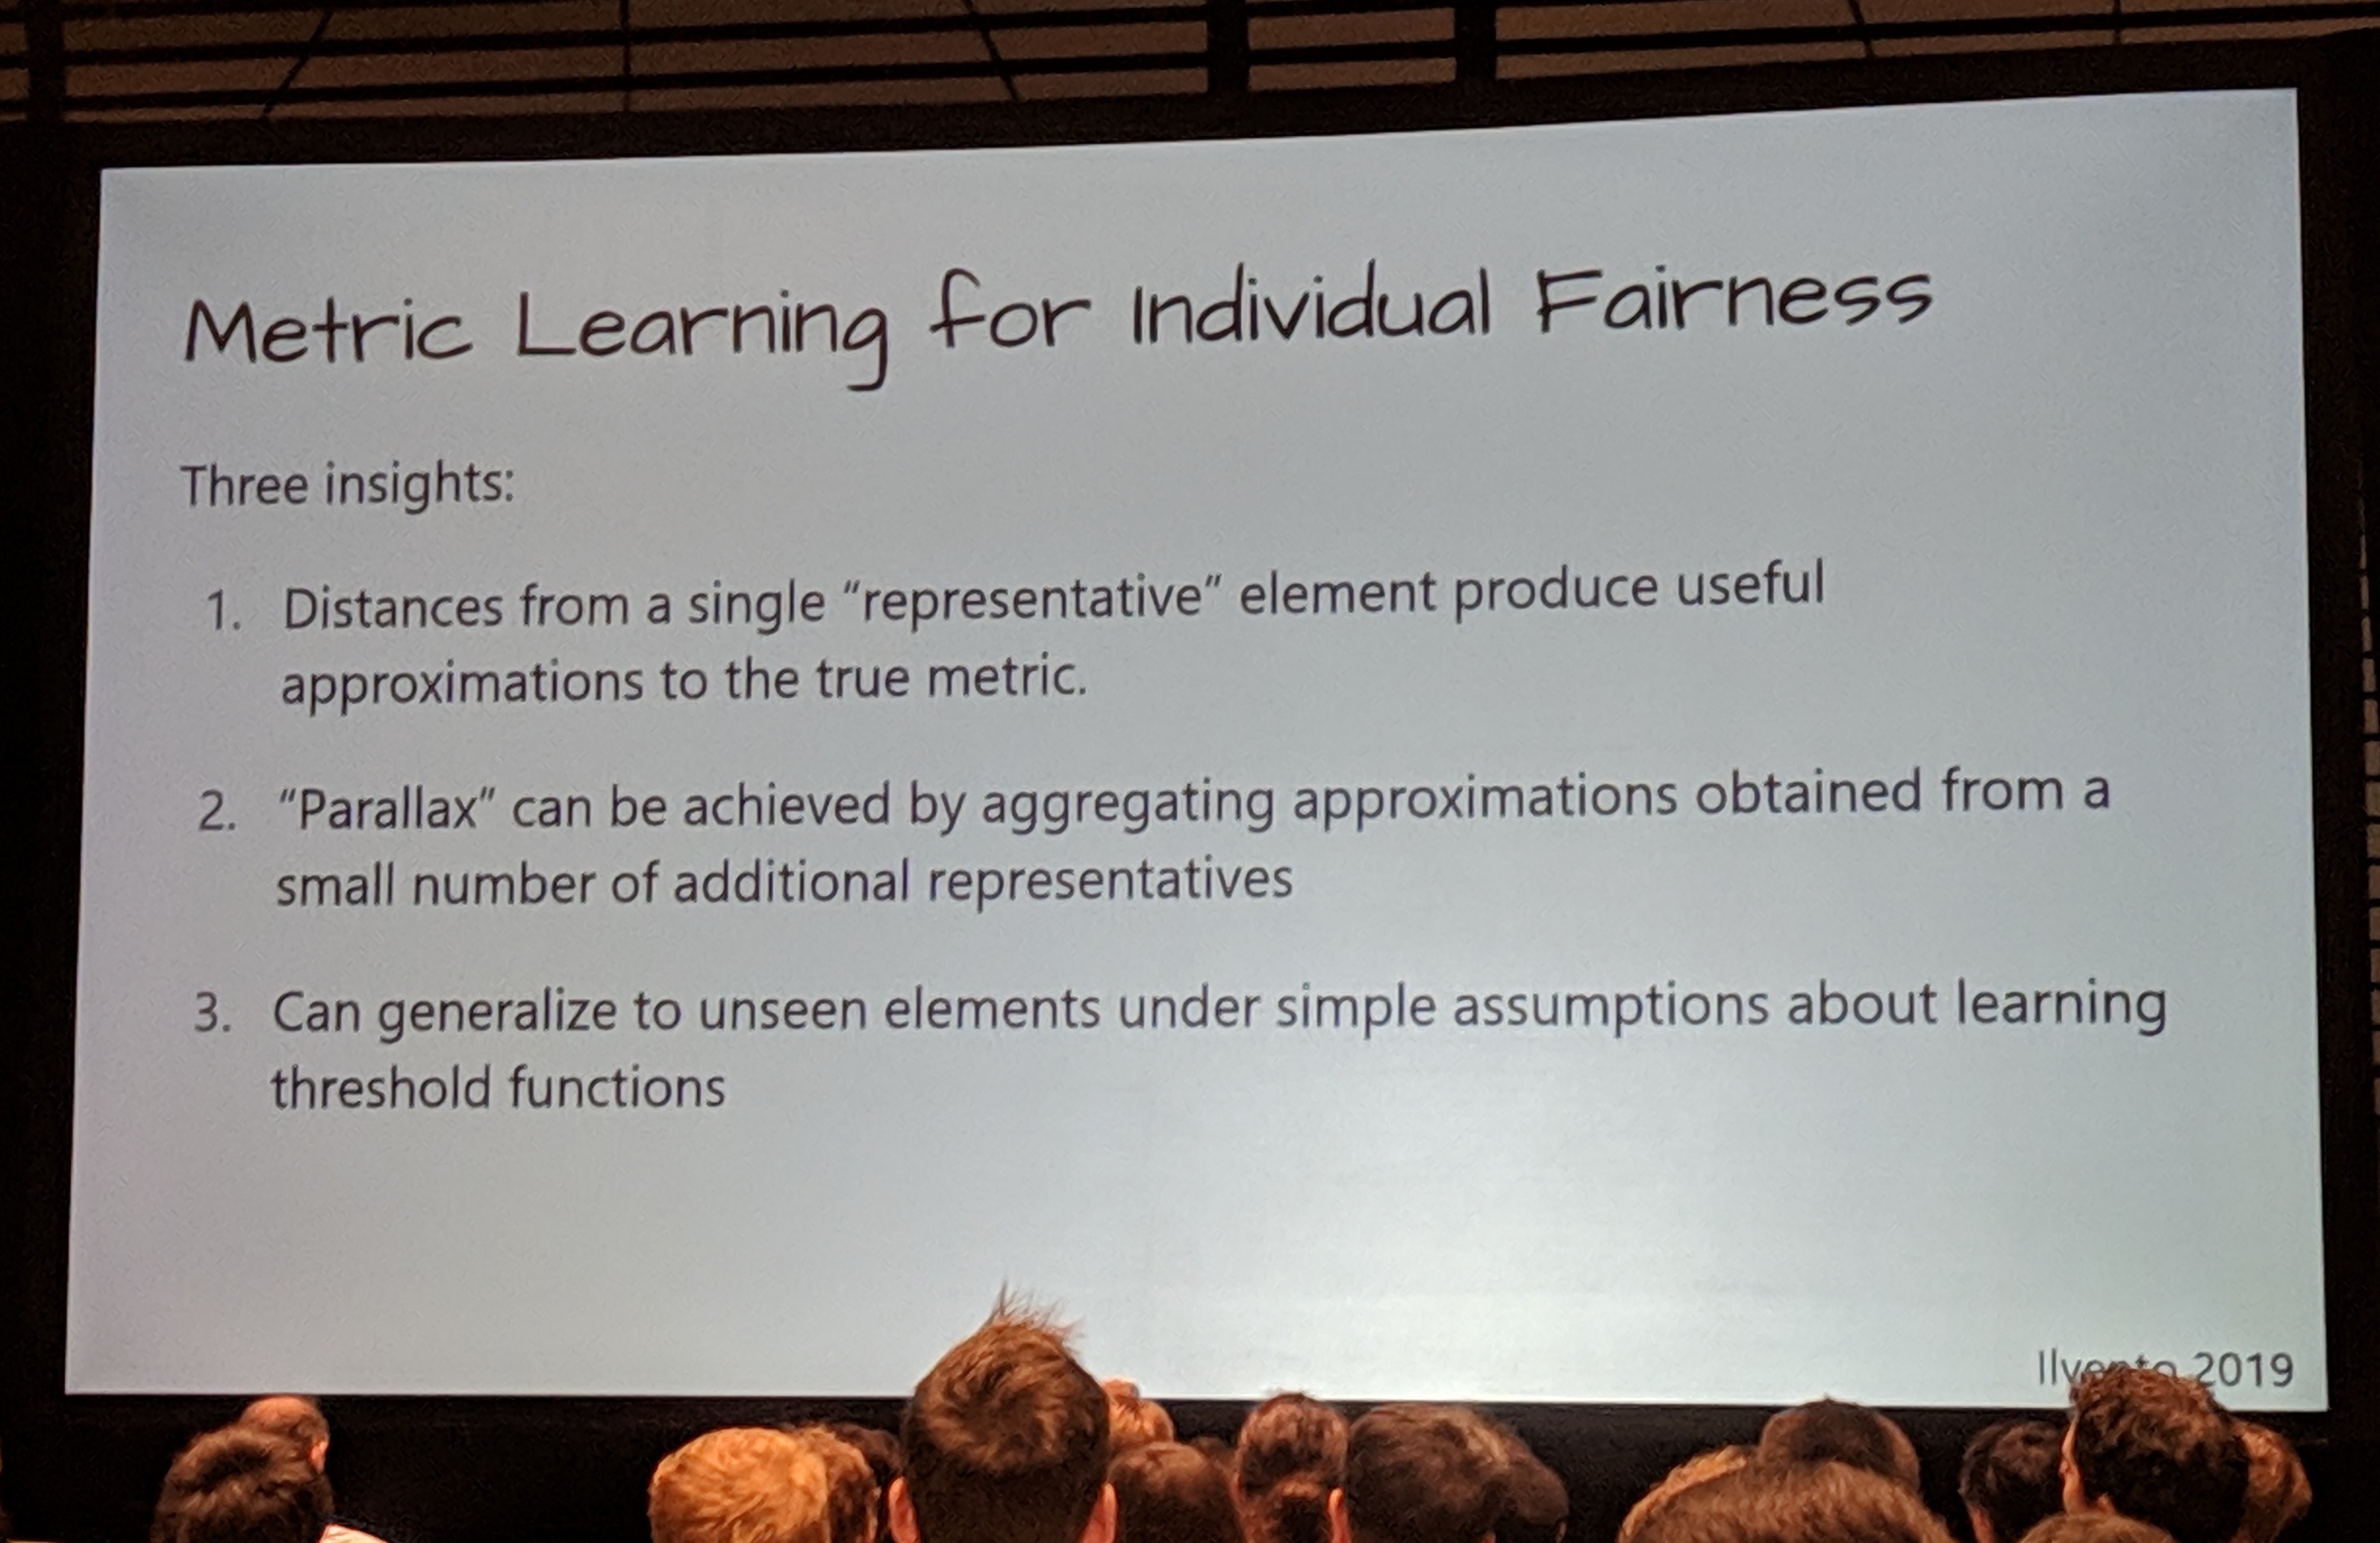 metric learning for individual fairness